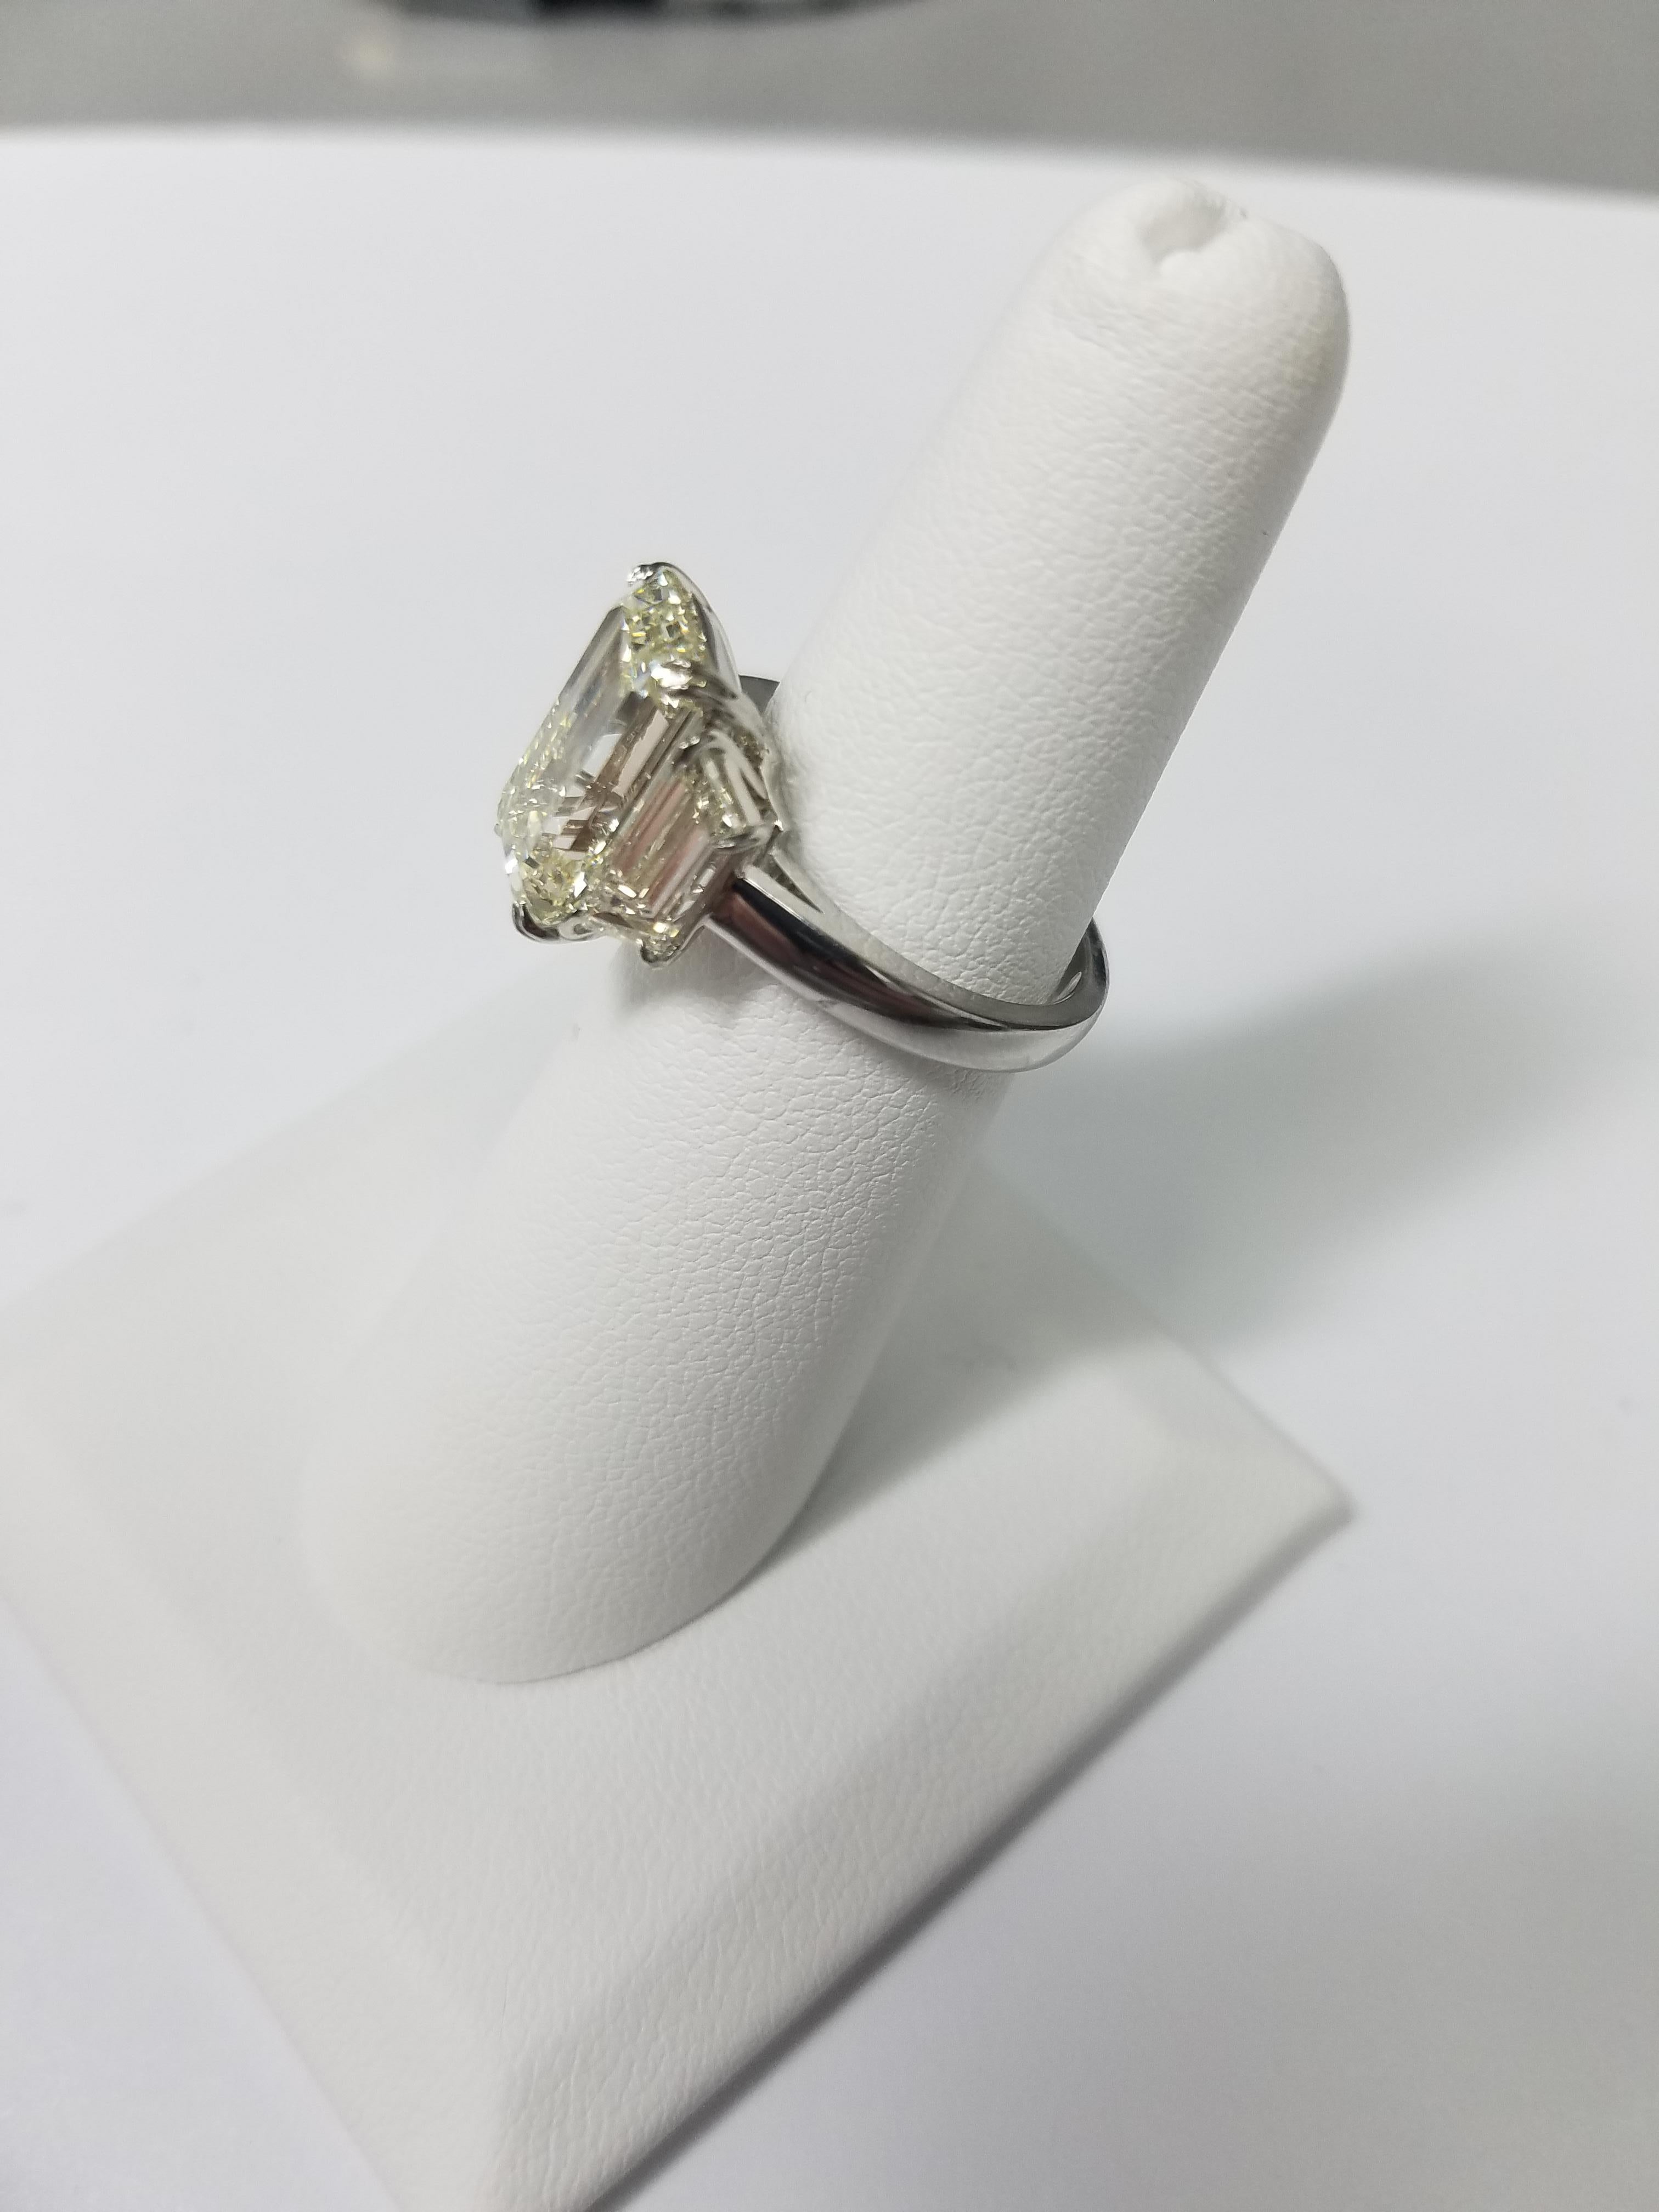 GIA Certified 5.11 carats Emerald Cut diamond ring. Center Stone is N color and VVS2 clarity. Set in a platinum setting with  2 trapezoid shaped diamonds weighing a total of 1.54 carats. 